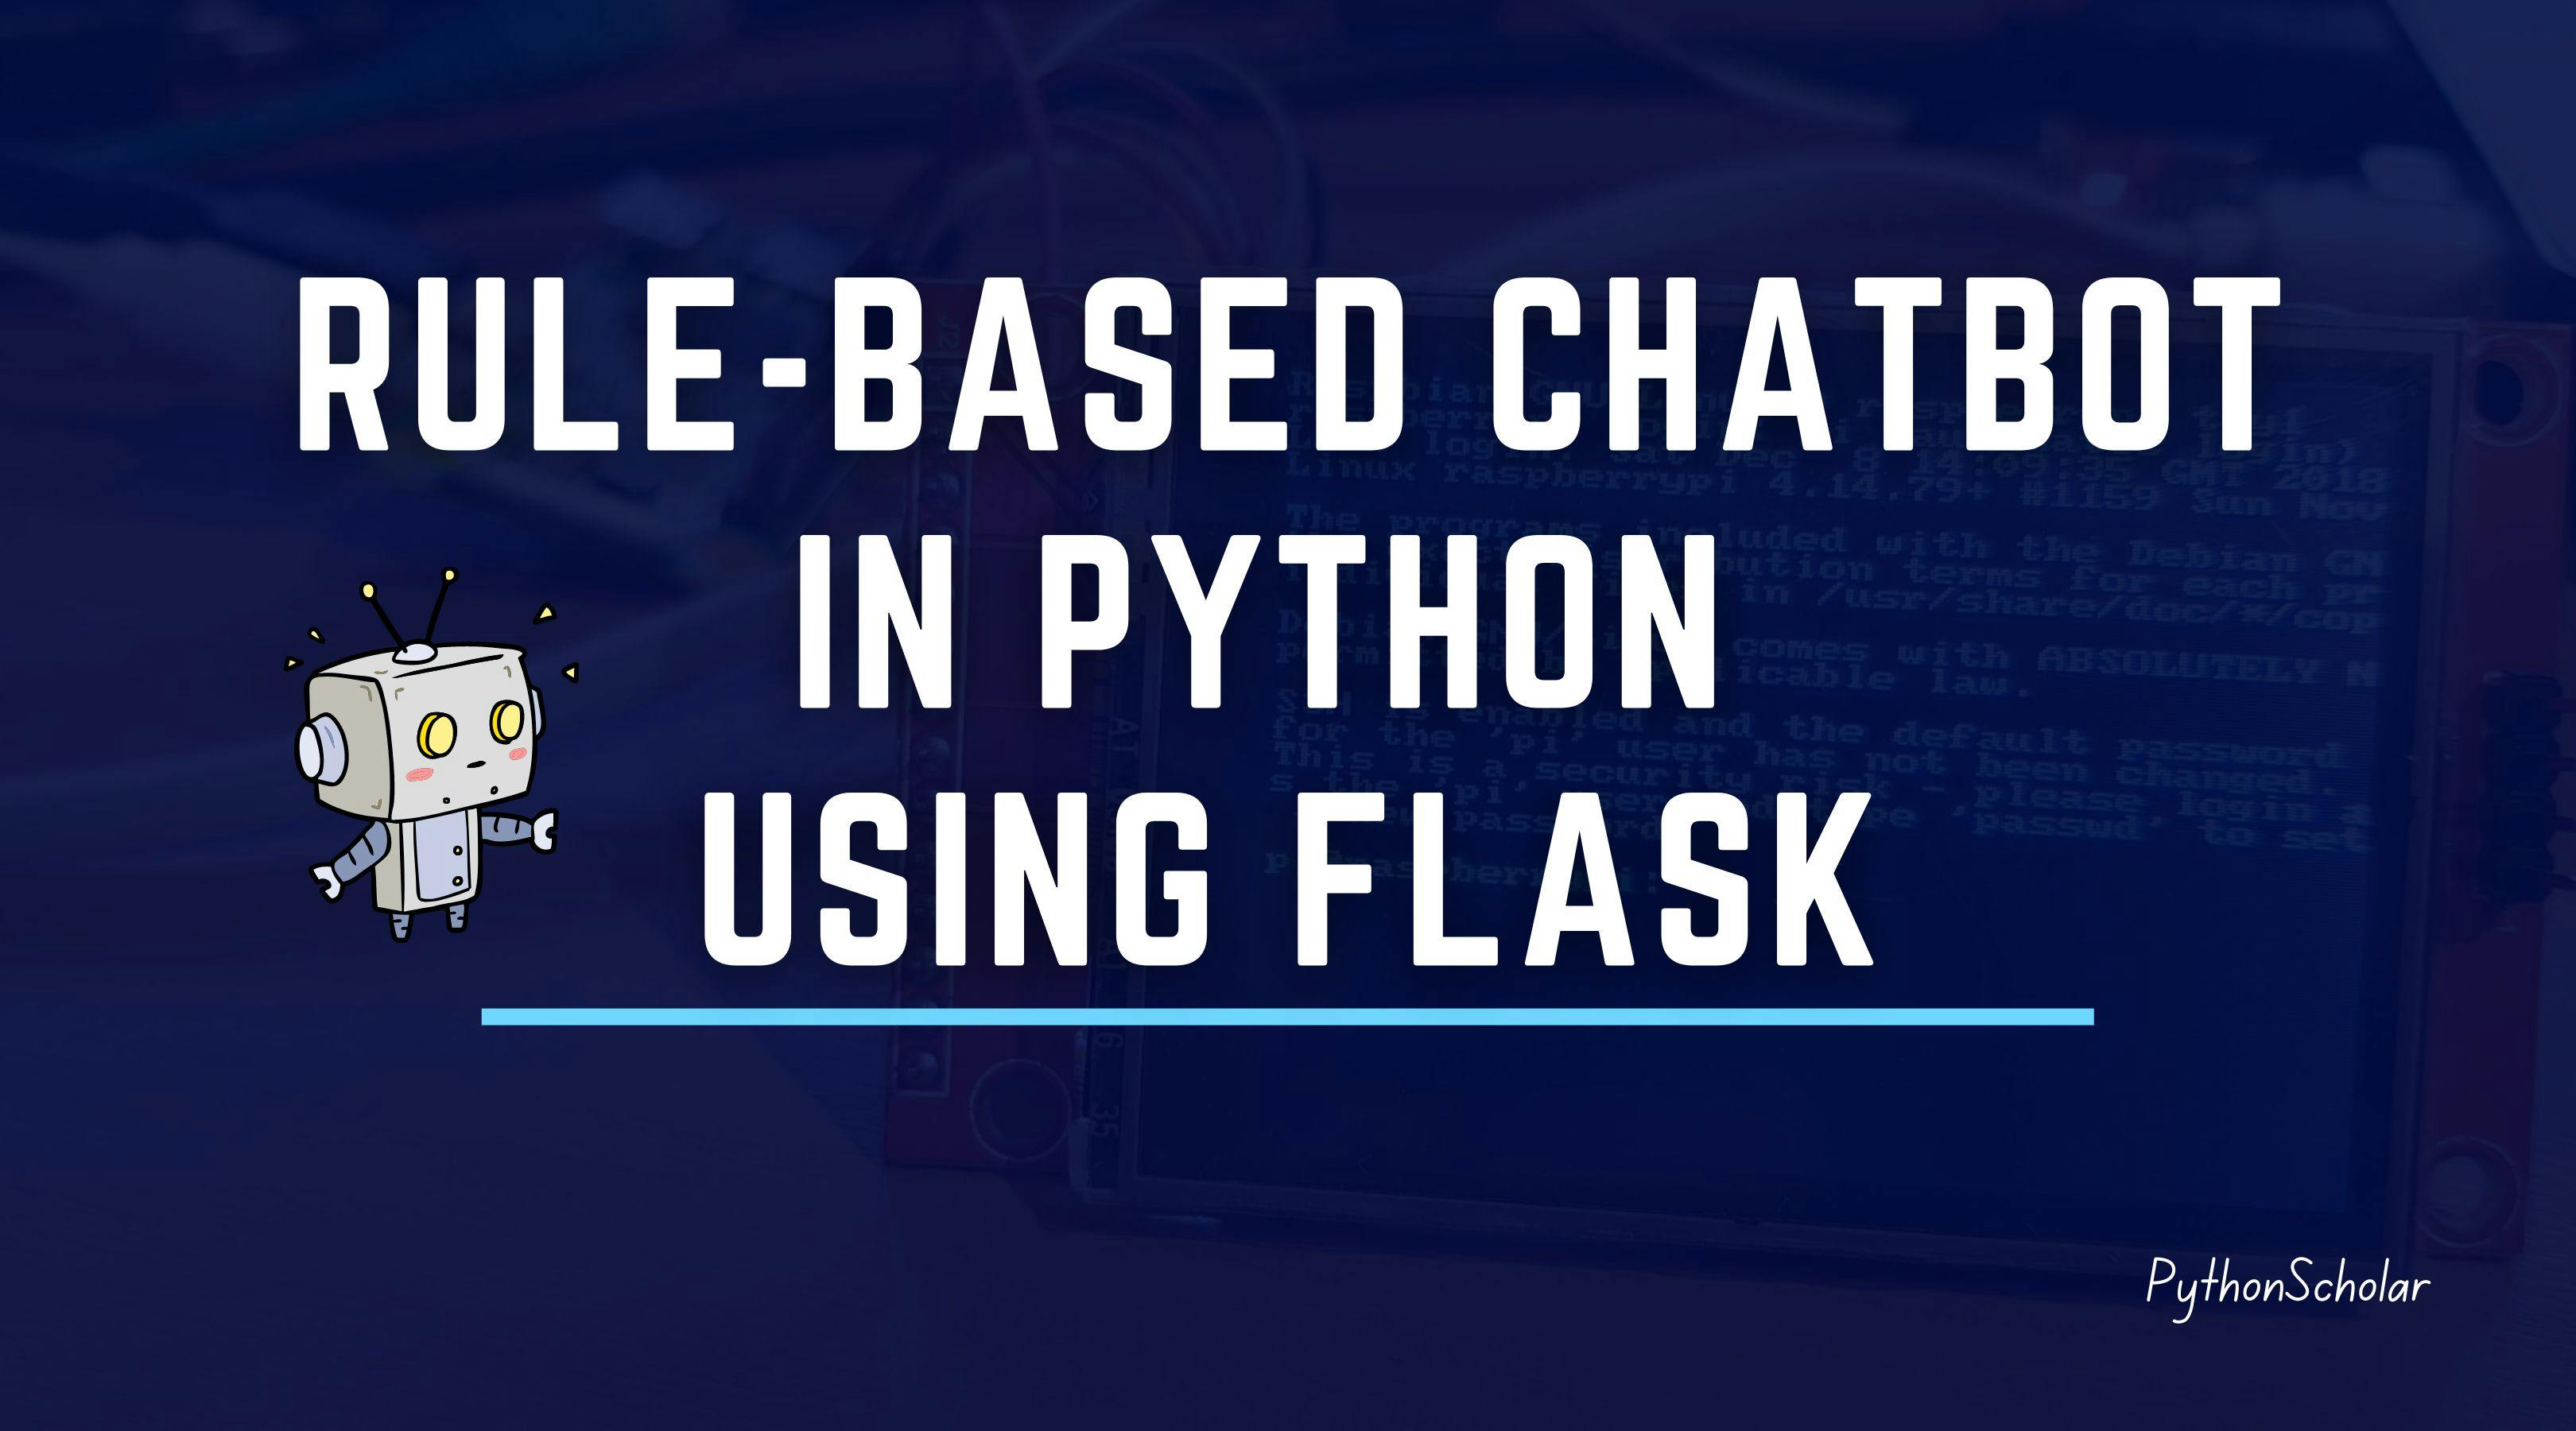 featured image - Using Flask to Build a Rule-based Chatbot in Python